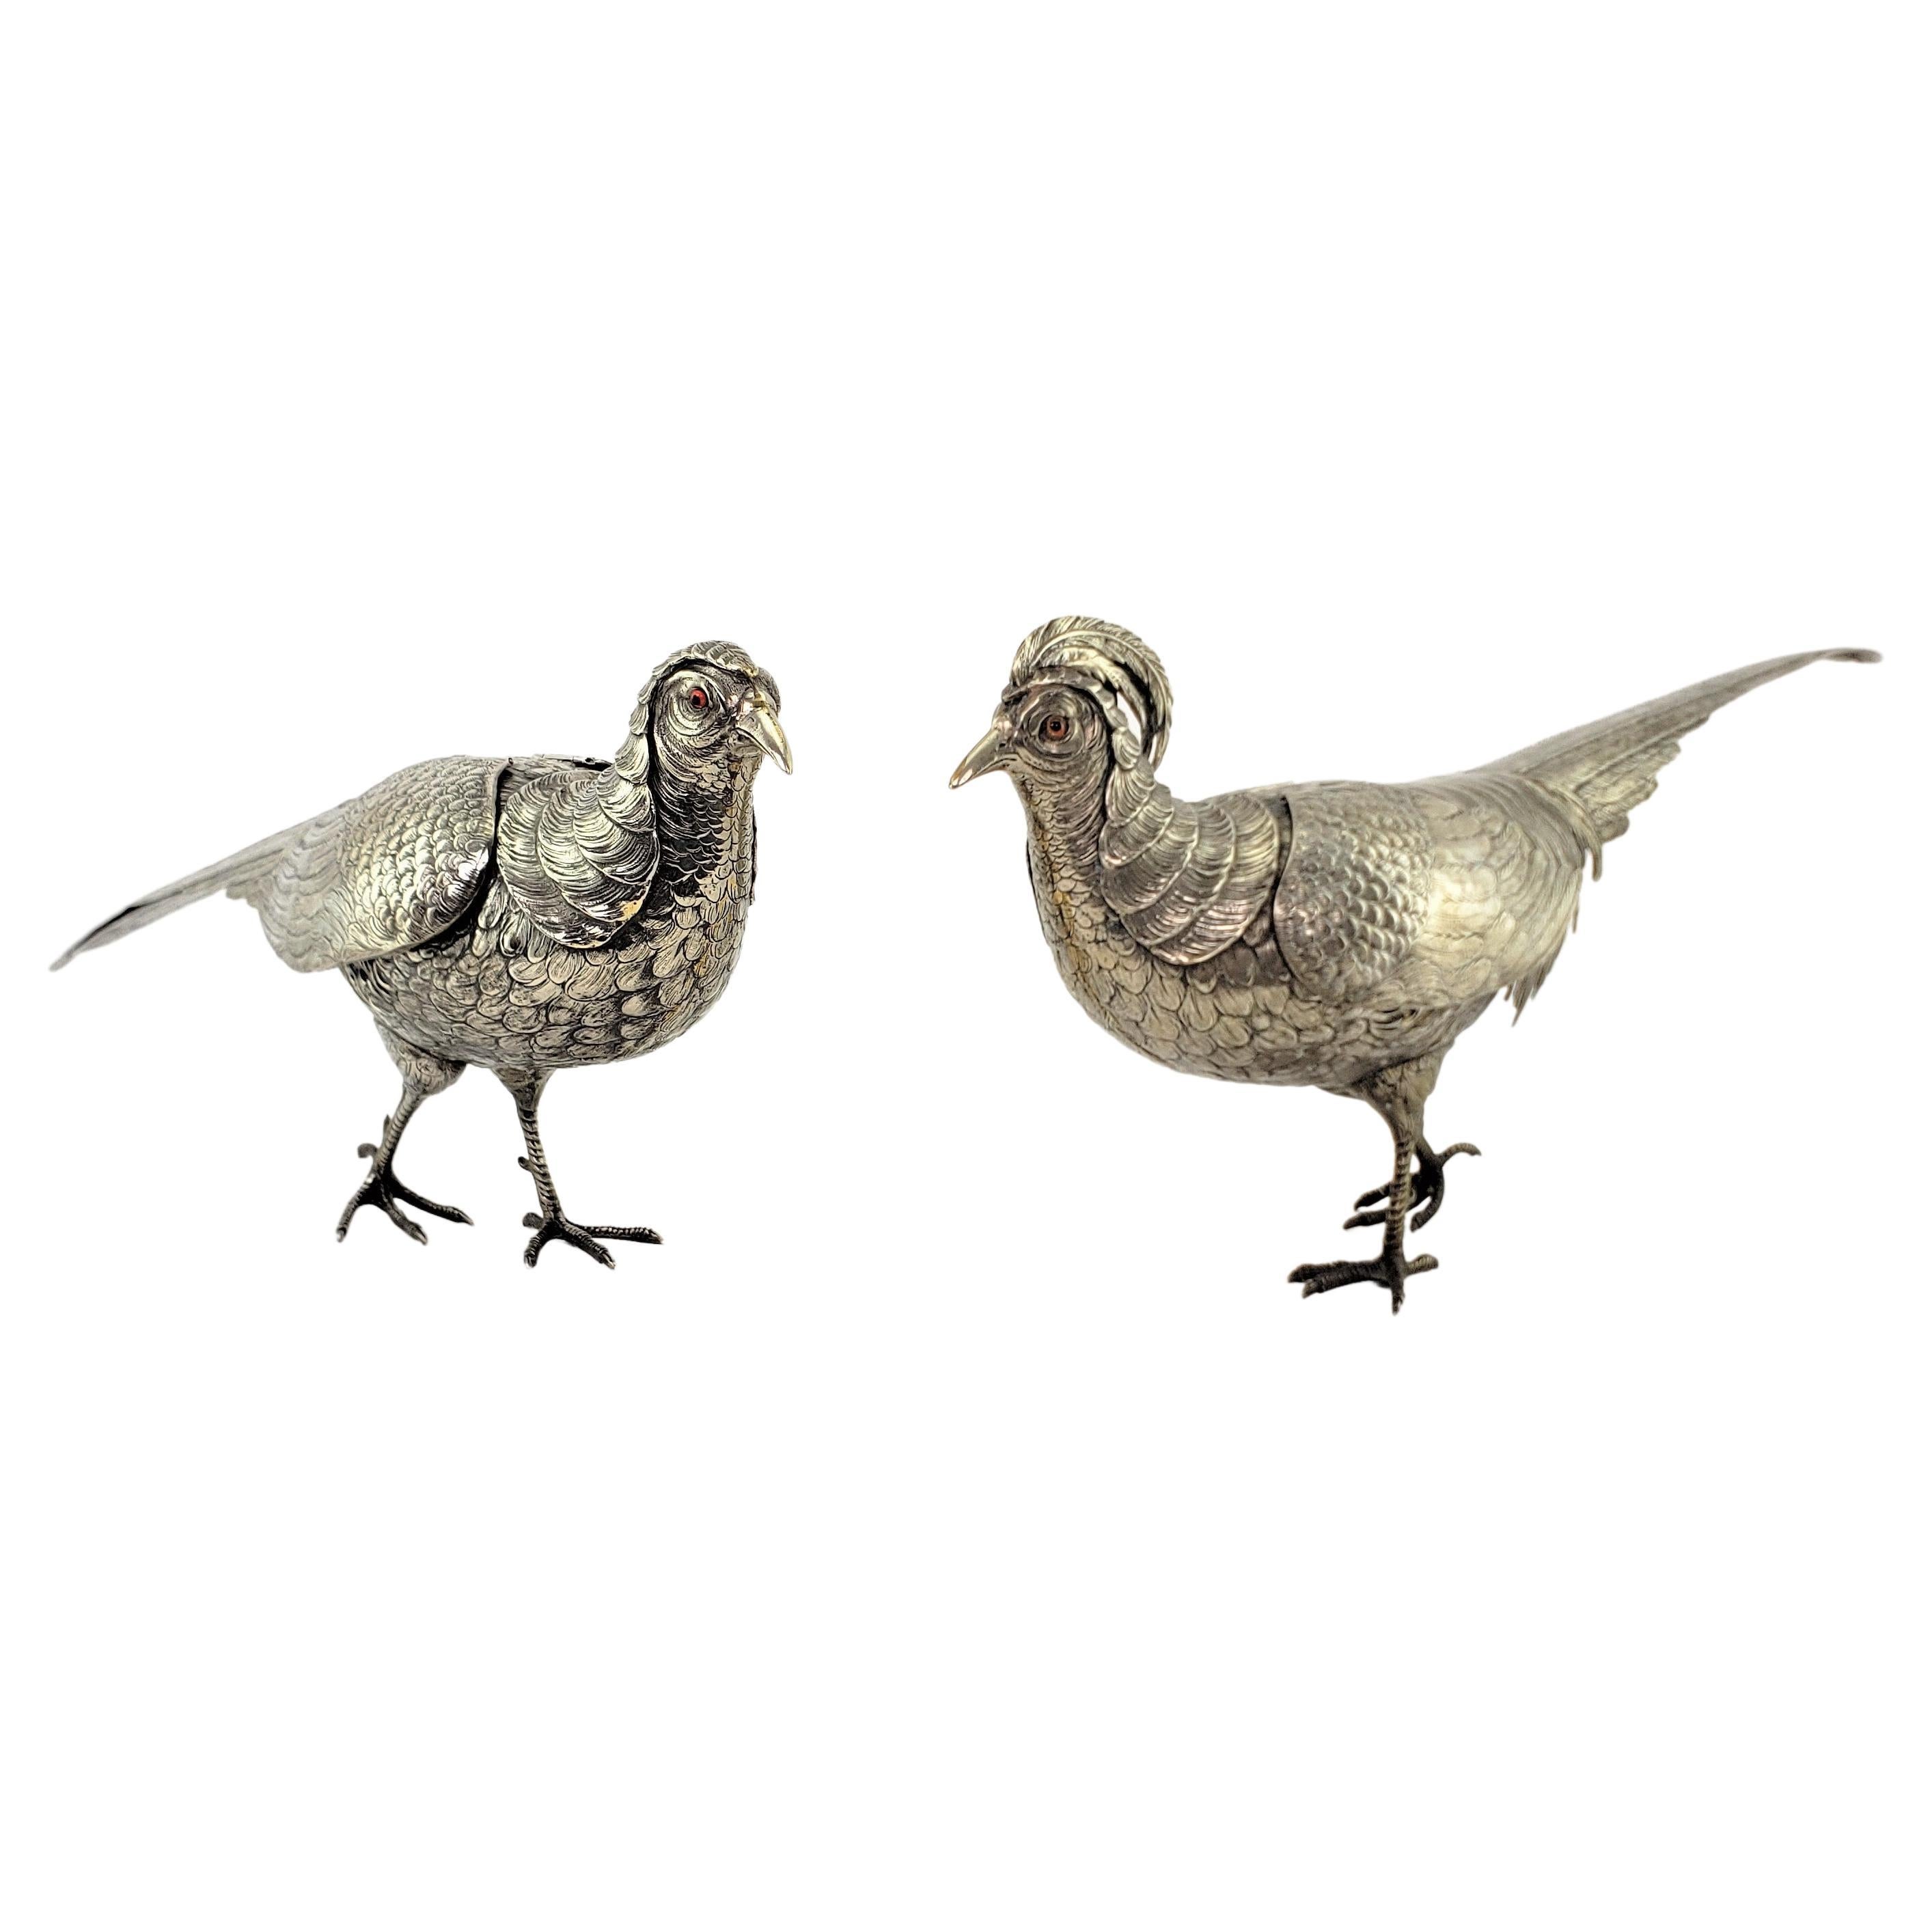 Pair of Large Antique Silver Plated Pheasant Sculptures with Articulated Wings